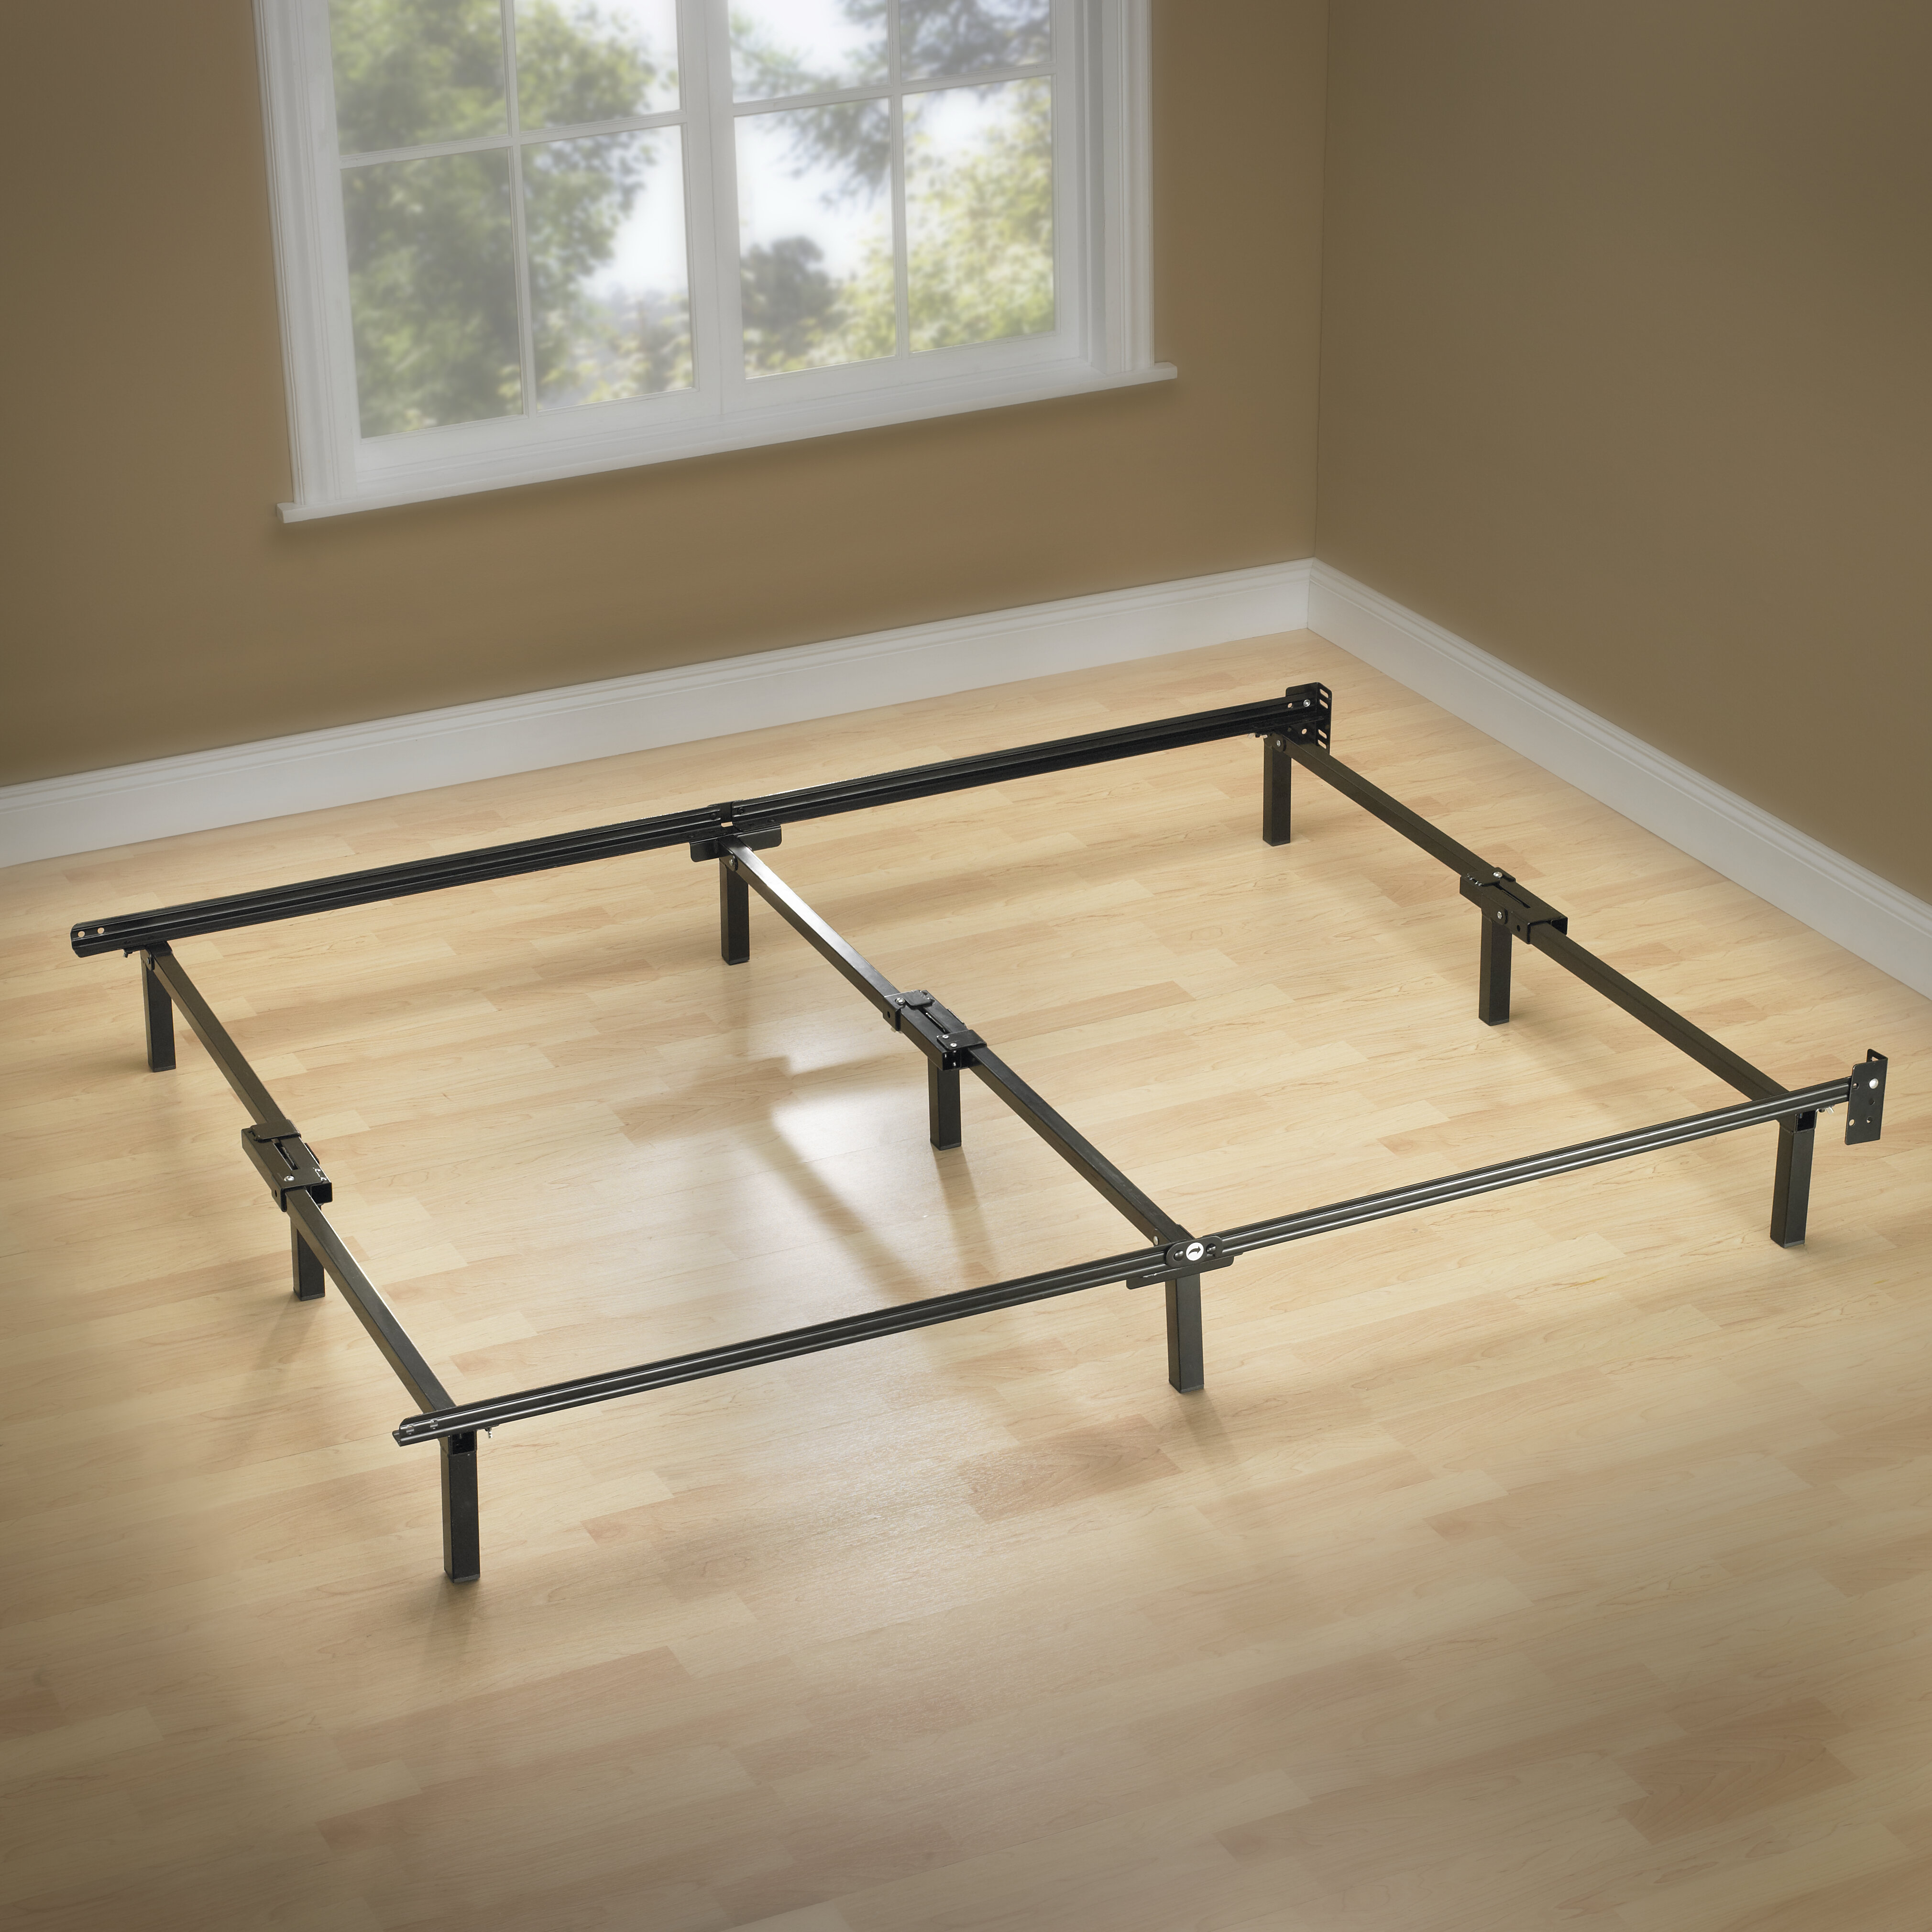 Alwyn Home Adjustable Full To King Size Bed Frame Reviews Wayfair